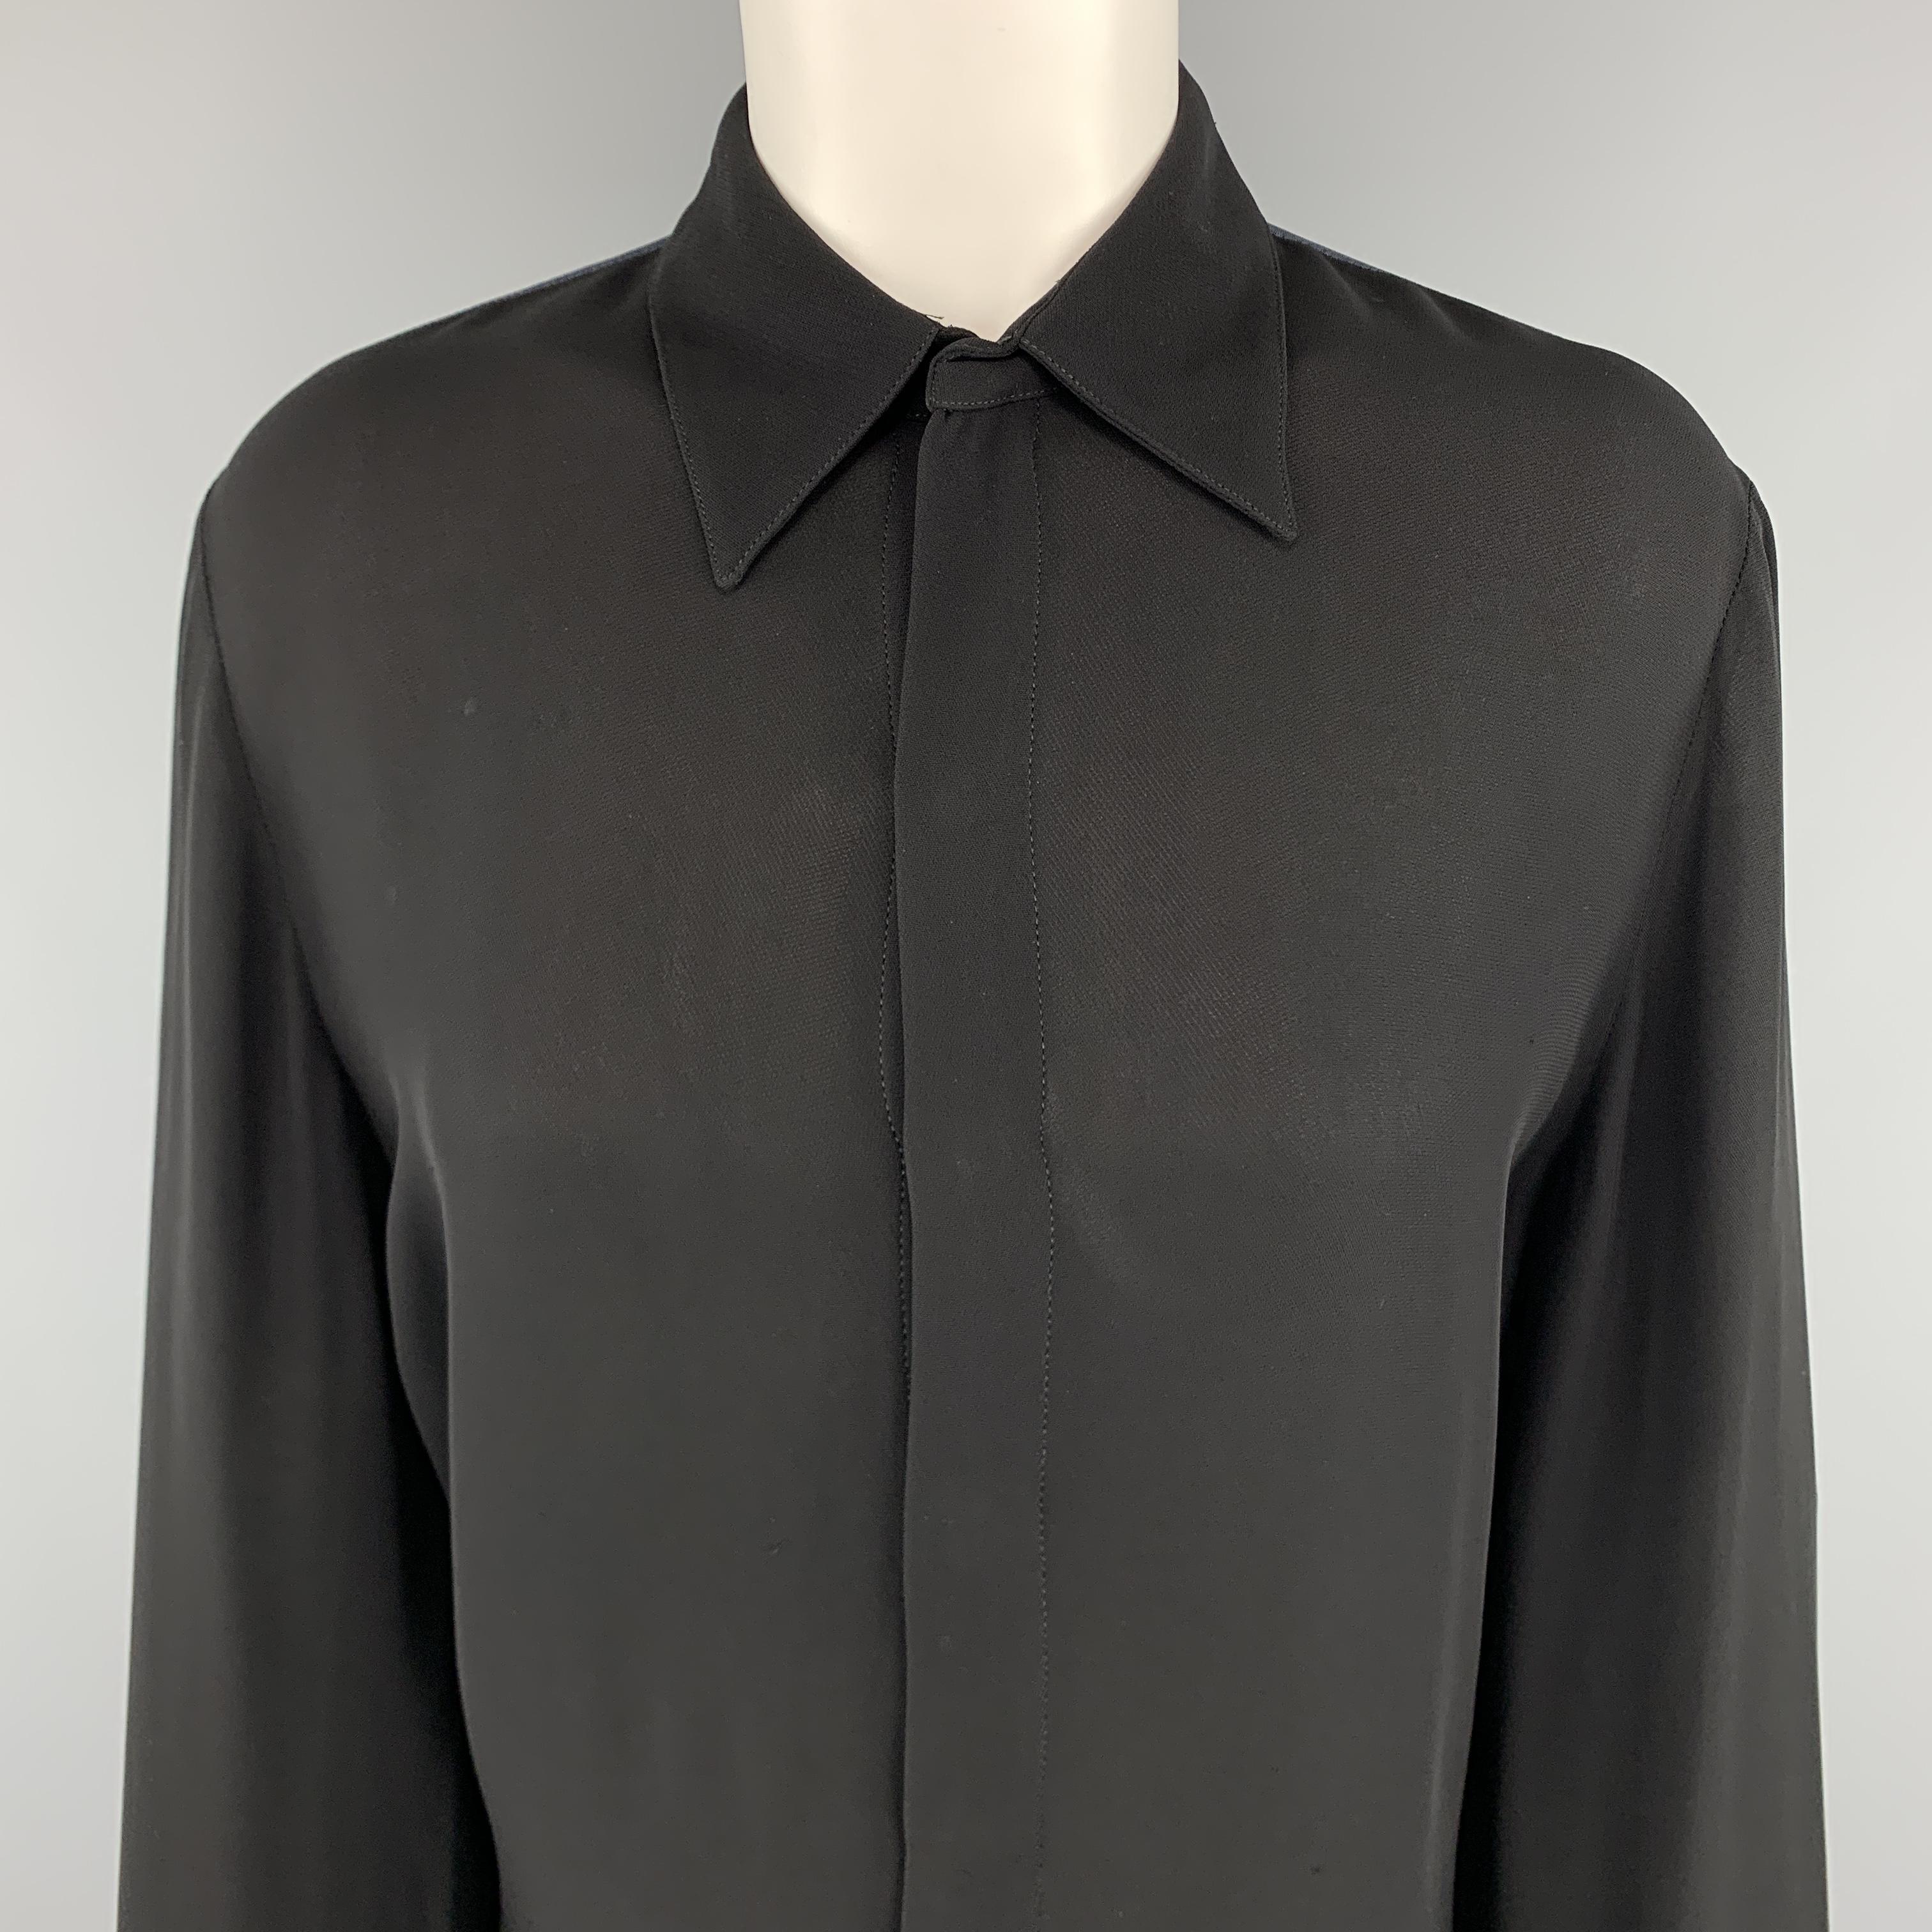 Vintage JEAN PAUL GAULTIER blouse comes in black crepe with a hidden snap placket front, pointed collar, mock French snap cuffs, and charcoal zebra hyde print back panel. Made in Italy.

Excellent Pre-Owned Condition.
Marked: